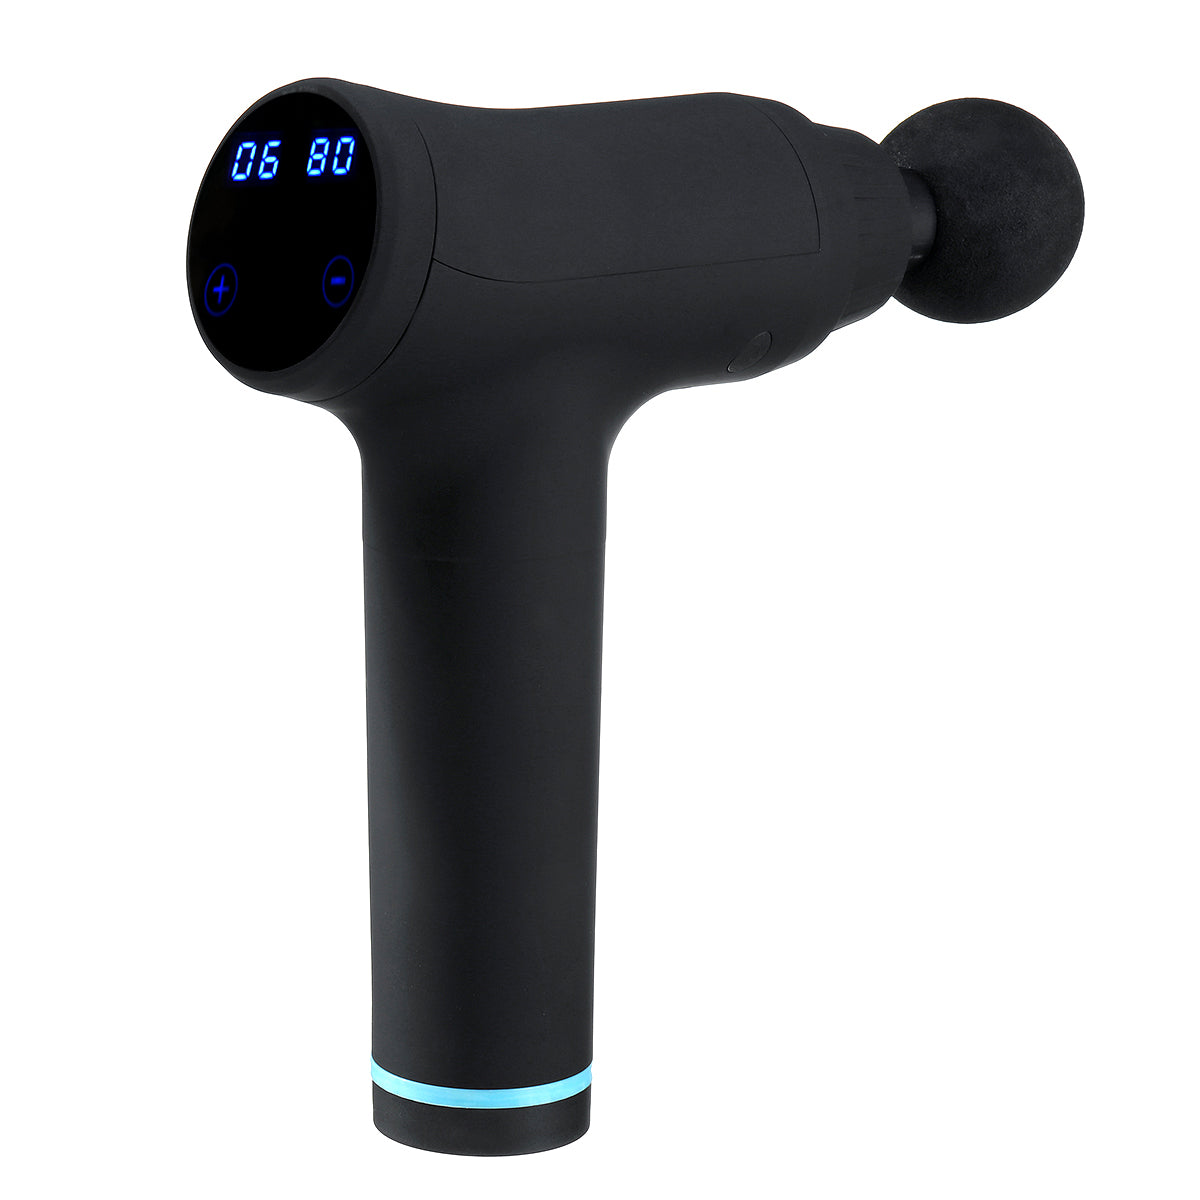 2500mah Touch Display Percussion Massager G un 6 Speed Quiet